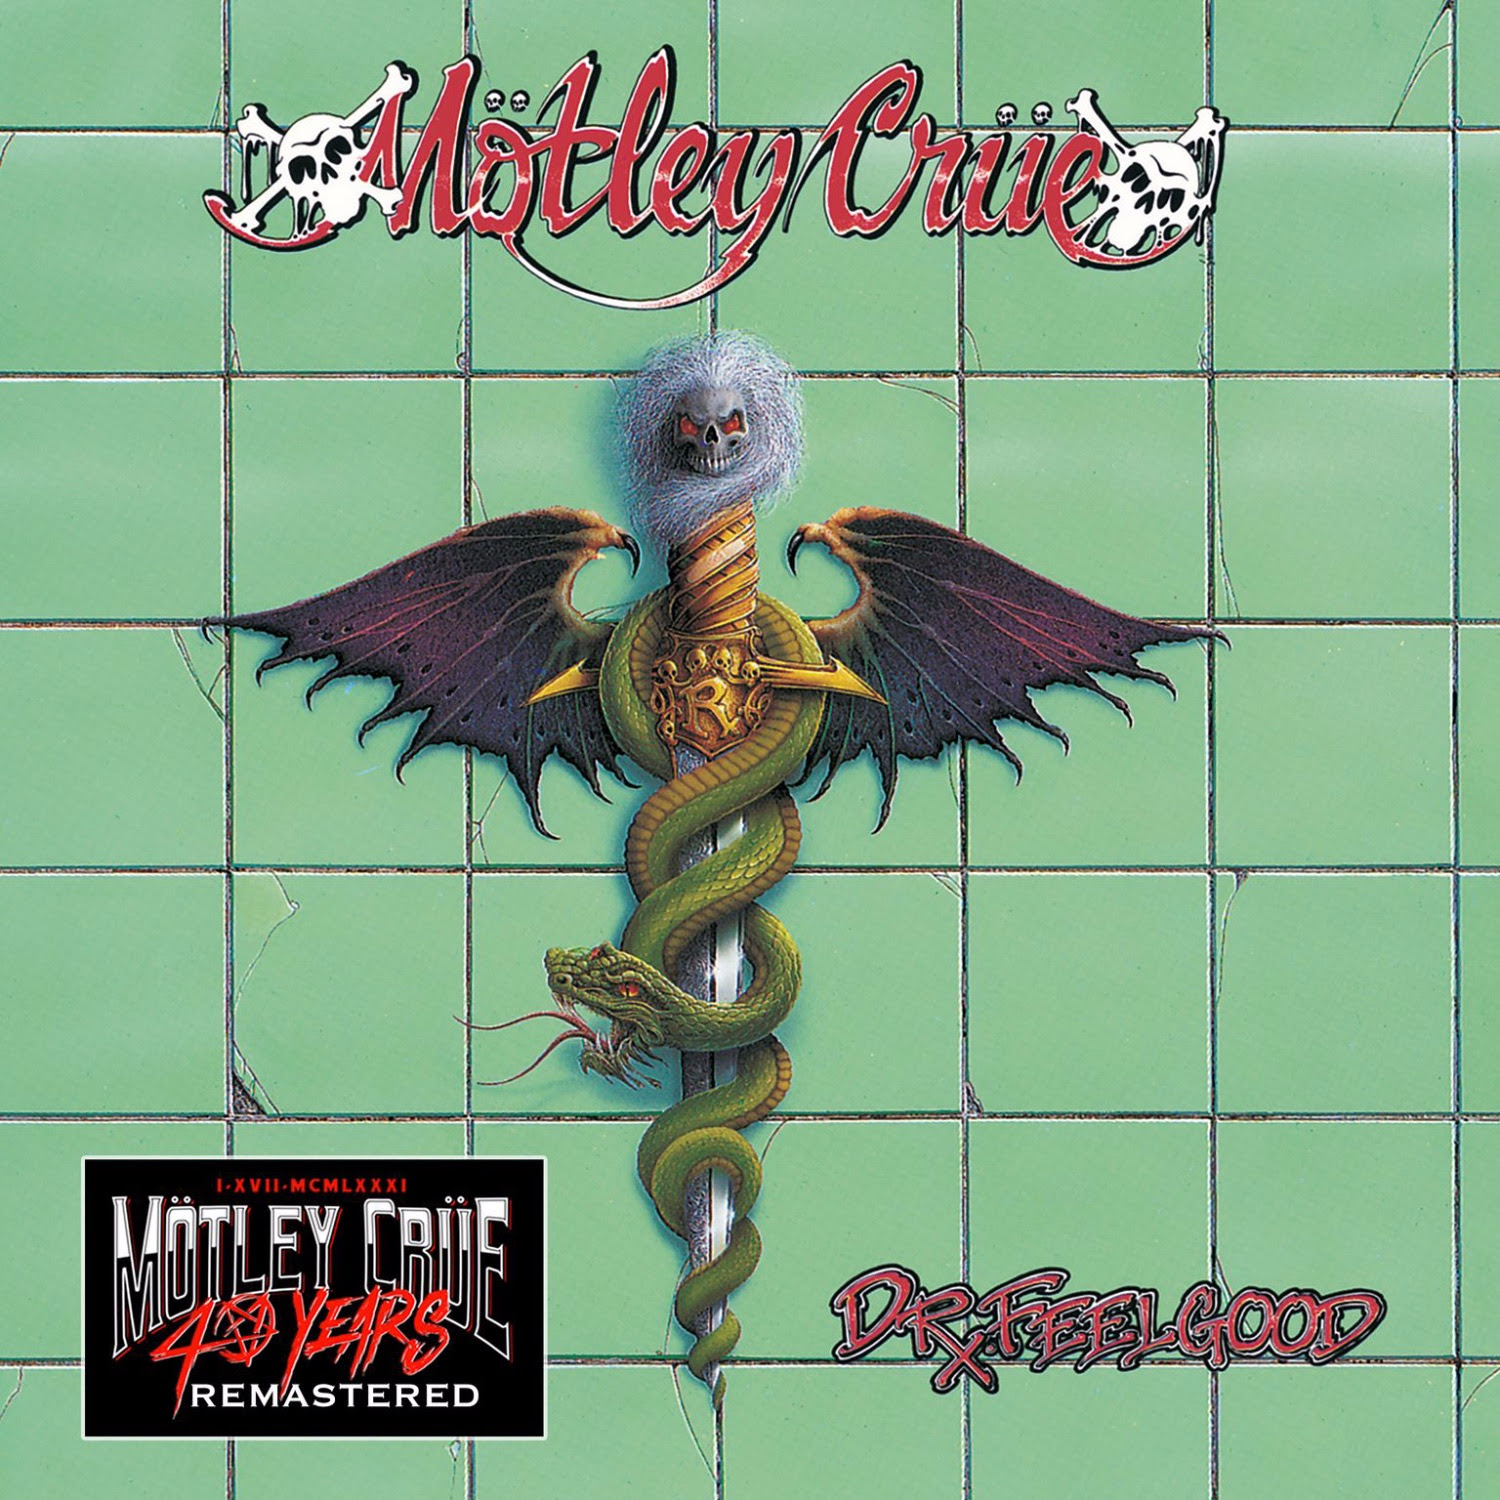 motley crue dr feelgood tour opening act